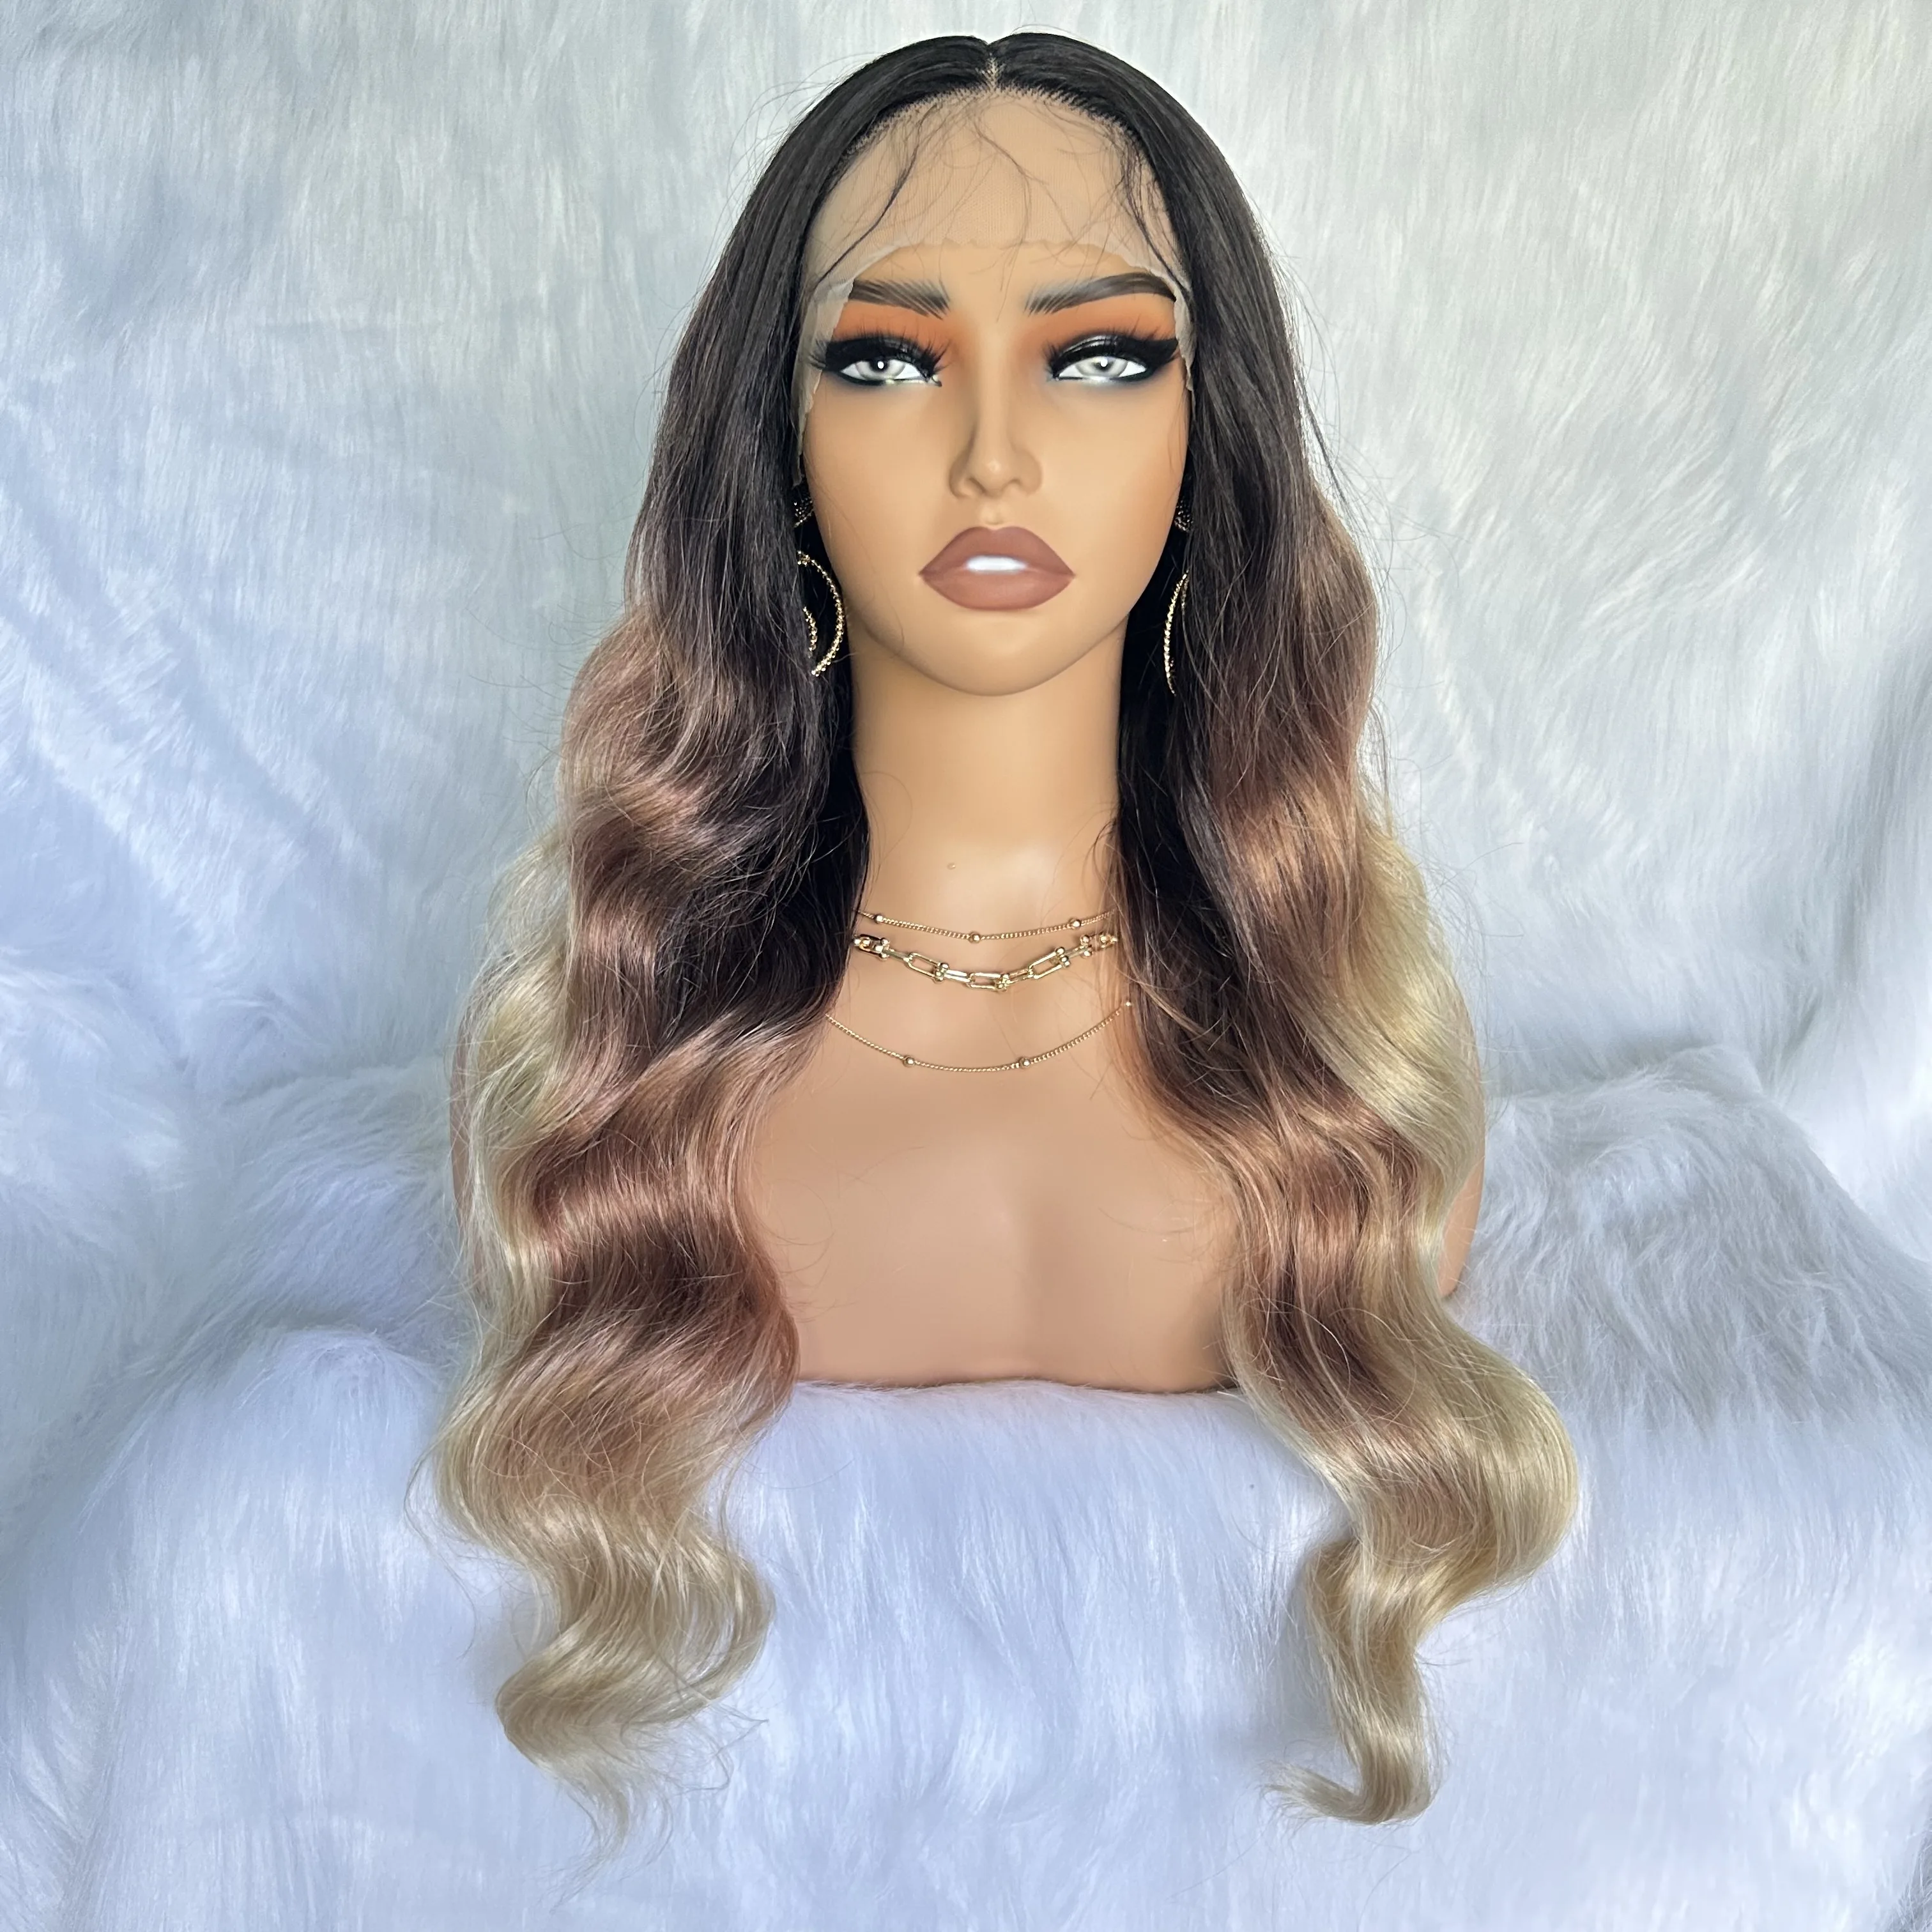 

X-TRESS 130% Density Heat Resistant Wig Black Ombre Brown Ombre Blonde Body Wave Soft Natural Synthetic Hair Wig For Black Women